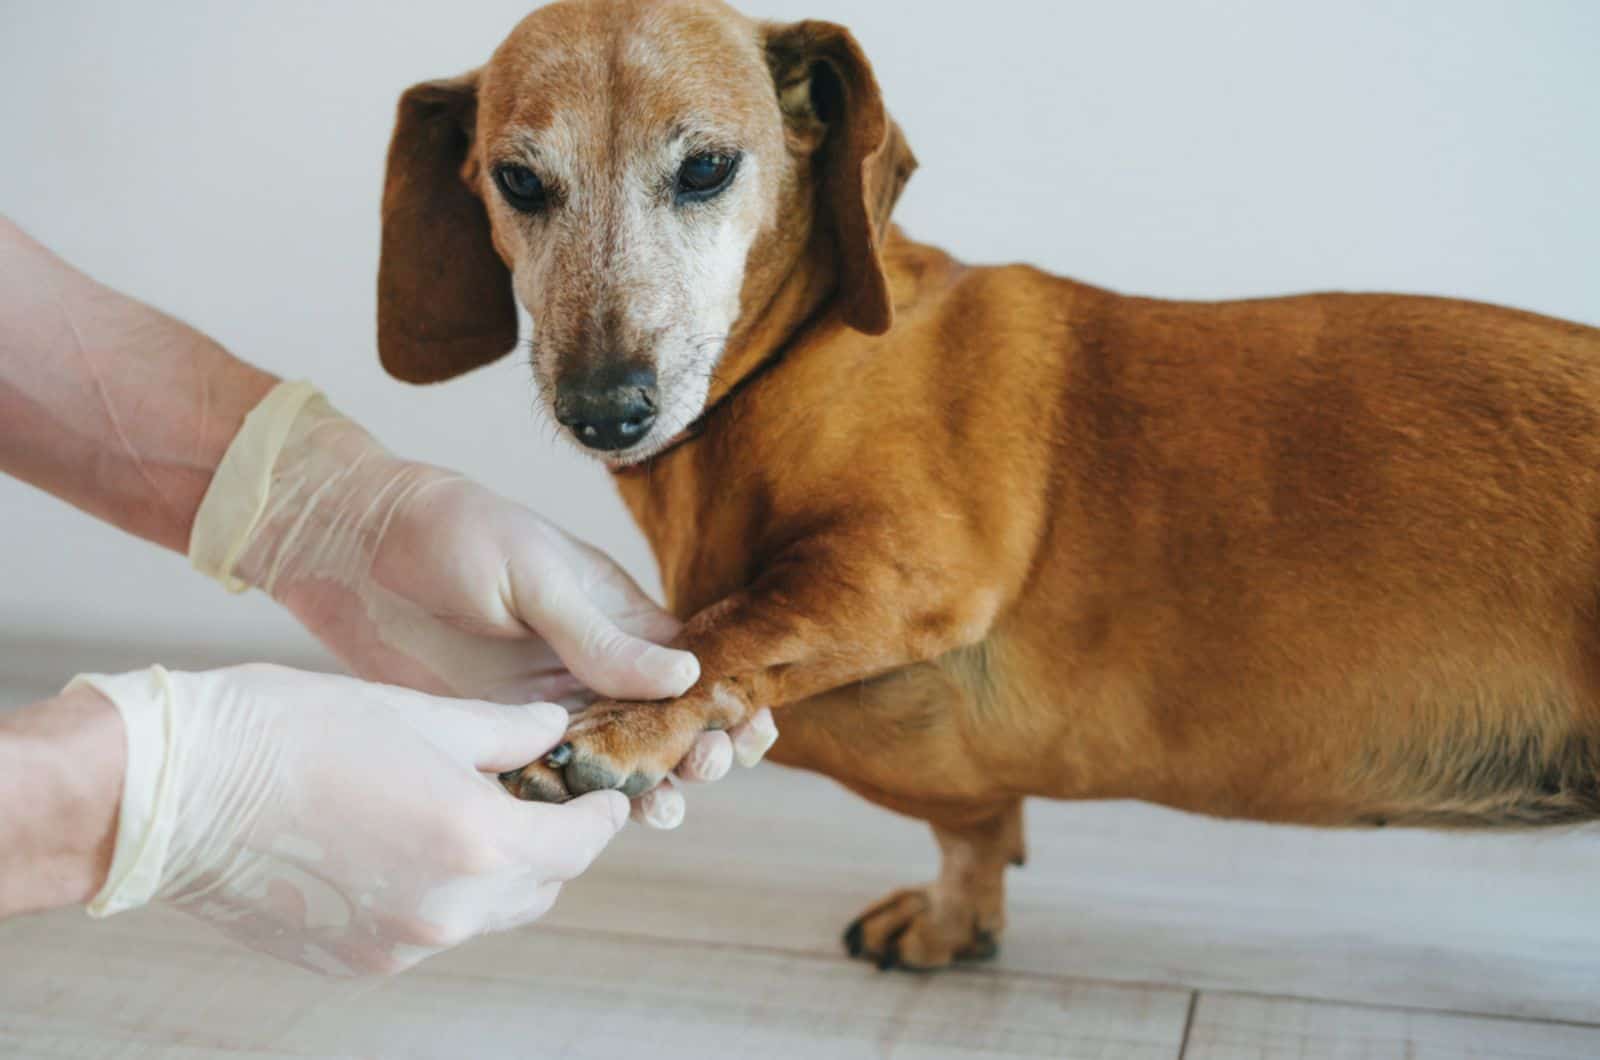 veterinarian touching the paw of the dog at examination